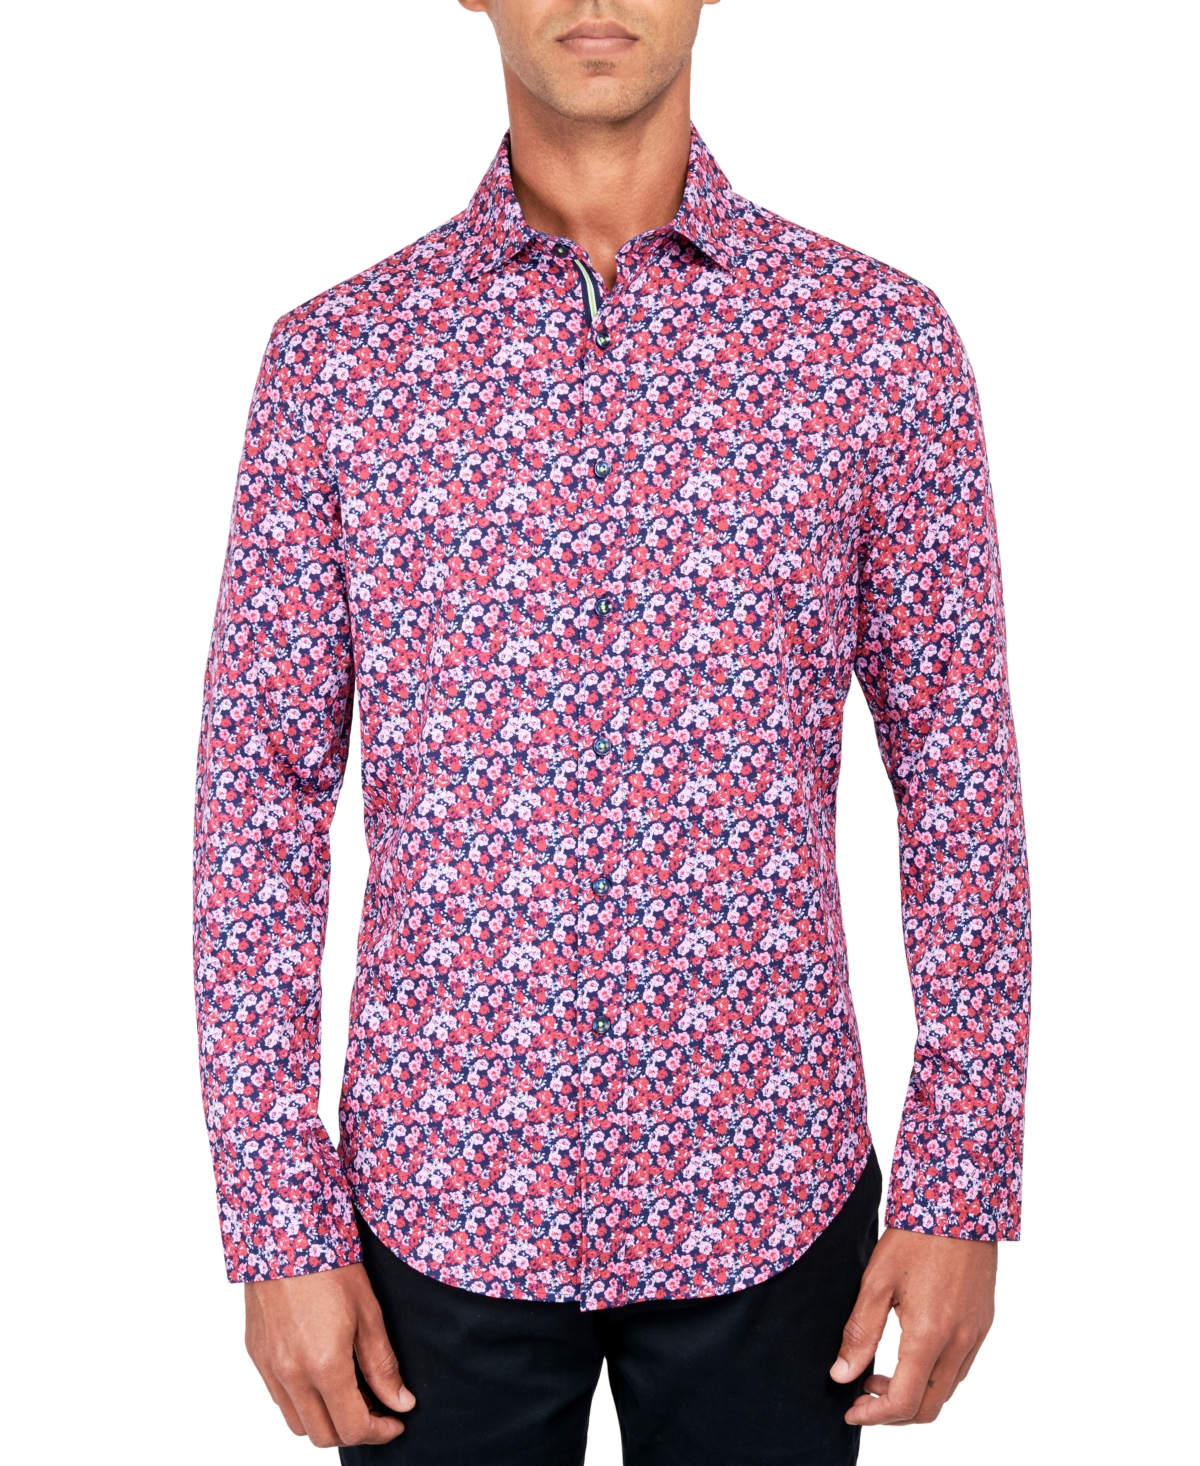 Men's Regular-Fit Non-Iron Performance Stretch Rose-Print Button-Down Shirt - Red